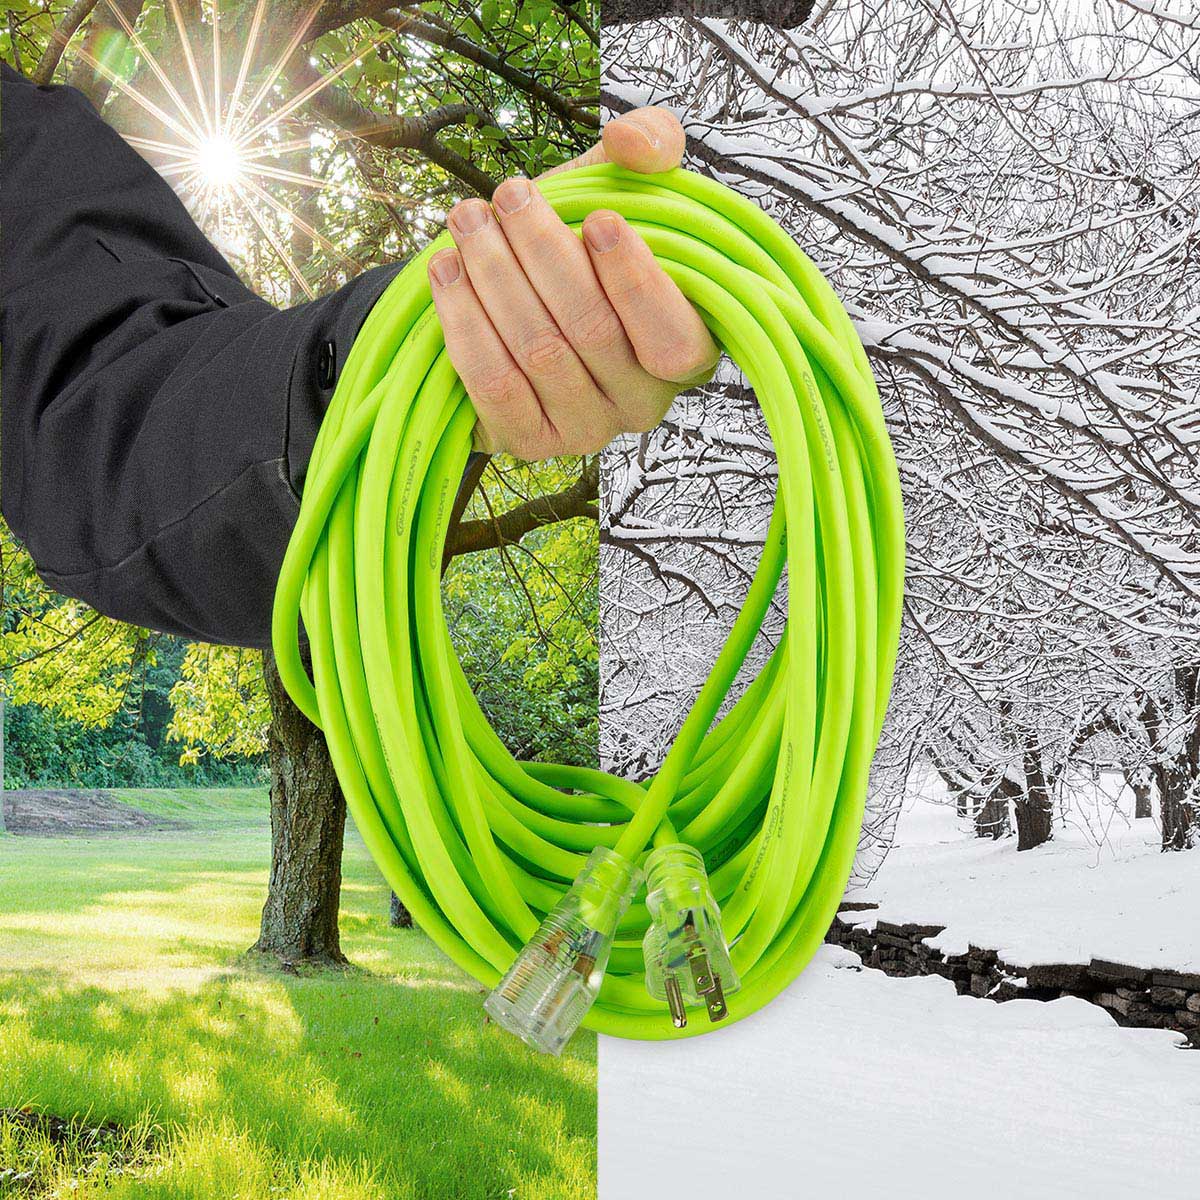 Flexzilla® Pro Extension Cord 12/3 Awg Sjtw 25' Outdoor Lighted Plug Zillagreen™